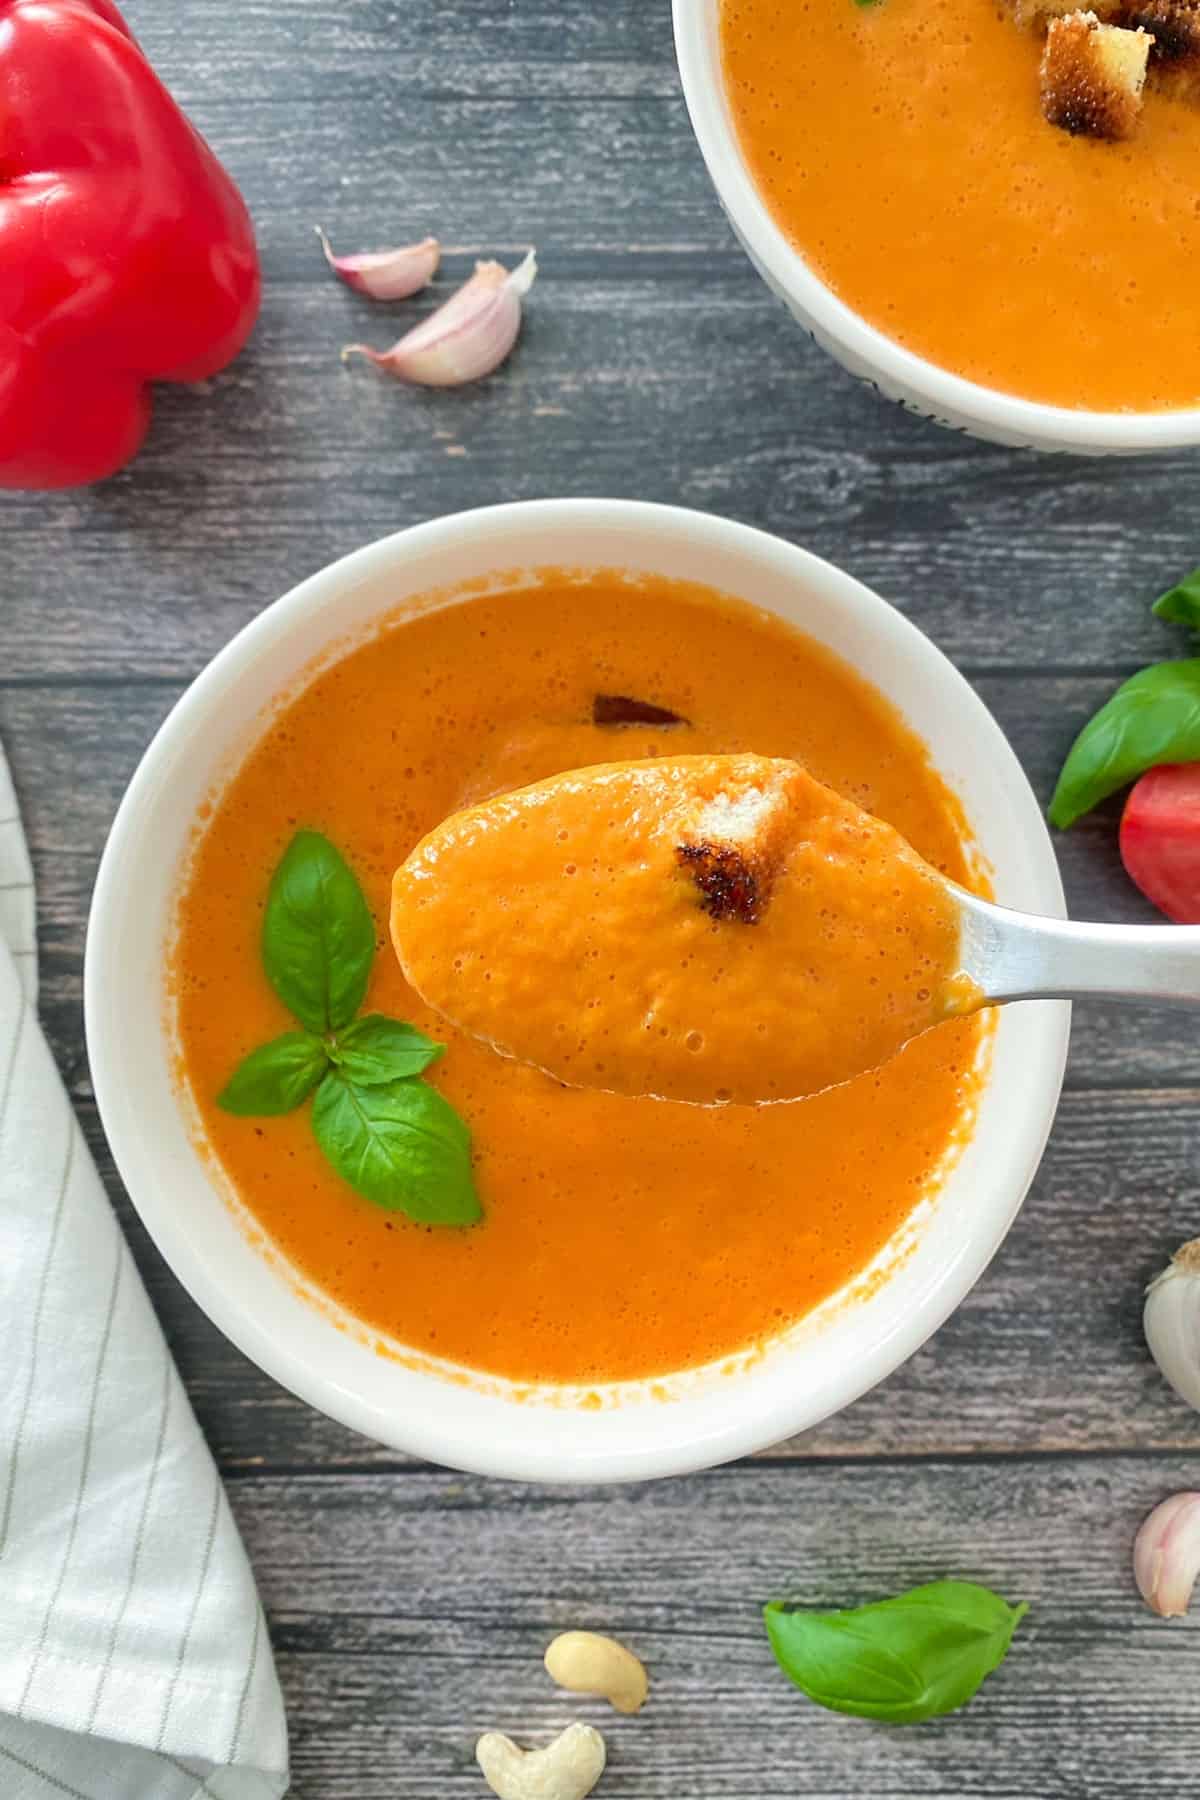 Spoonful of tomato soup being held over bowl.